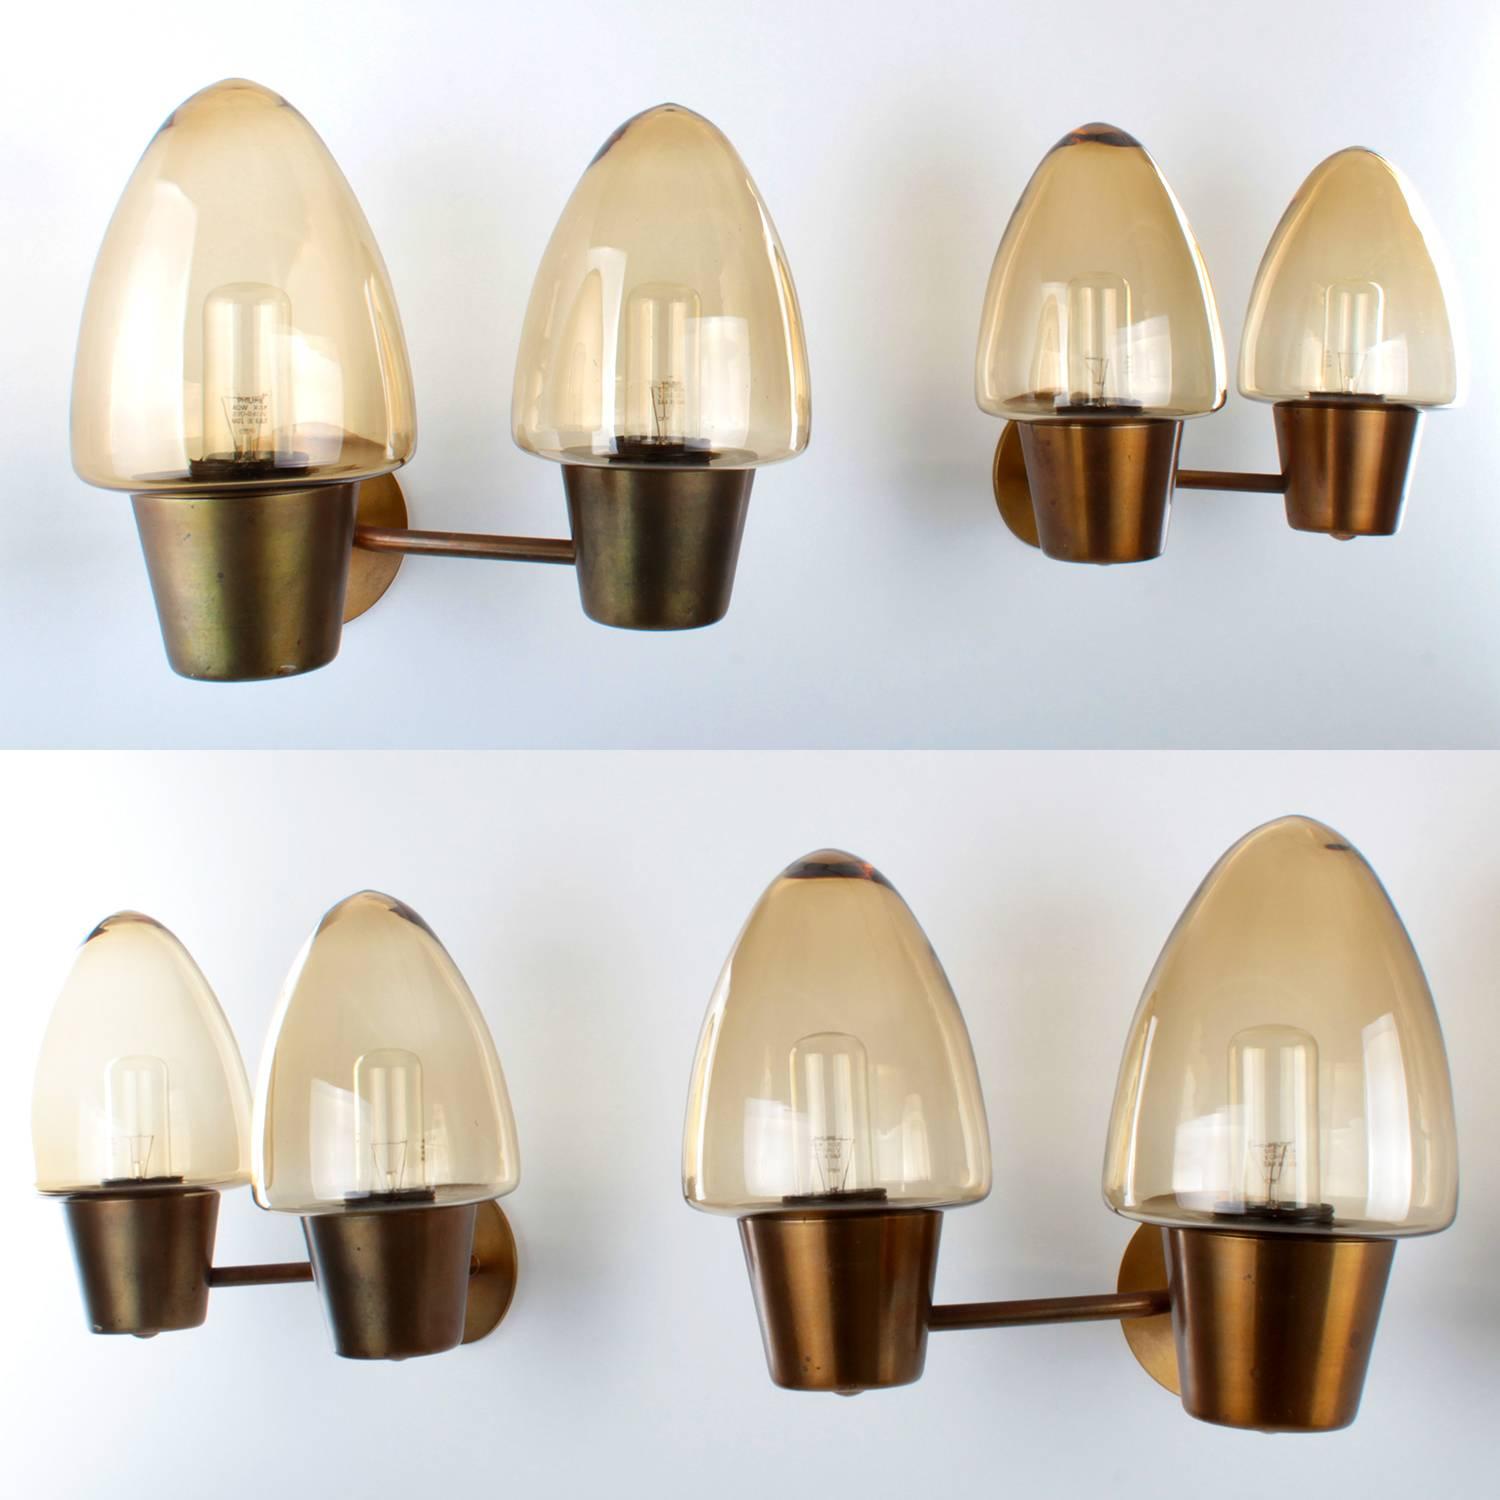 Mid-Century Modern Crystal Glass Sconces, Pair by Hans-Agne Jakobsson, 1960s, Gorgeous Wall Lamps